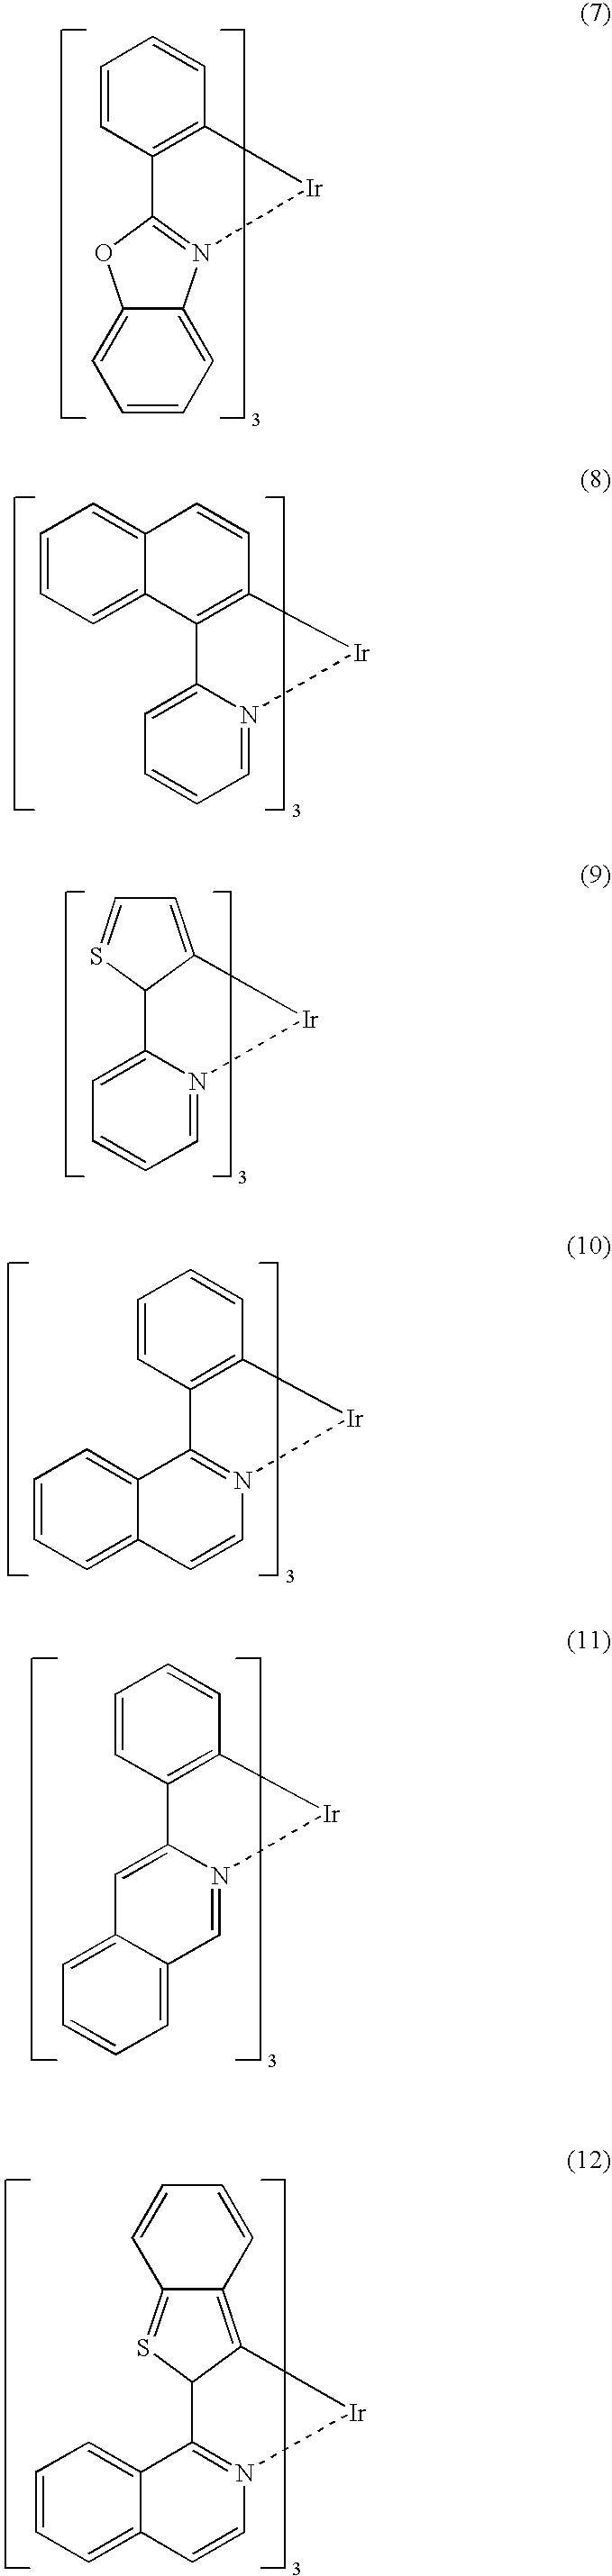 Process for Producing Ortho-Metalated Complex of Iridium With Homoligand